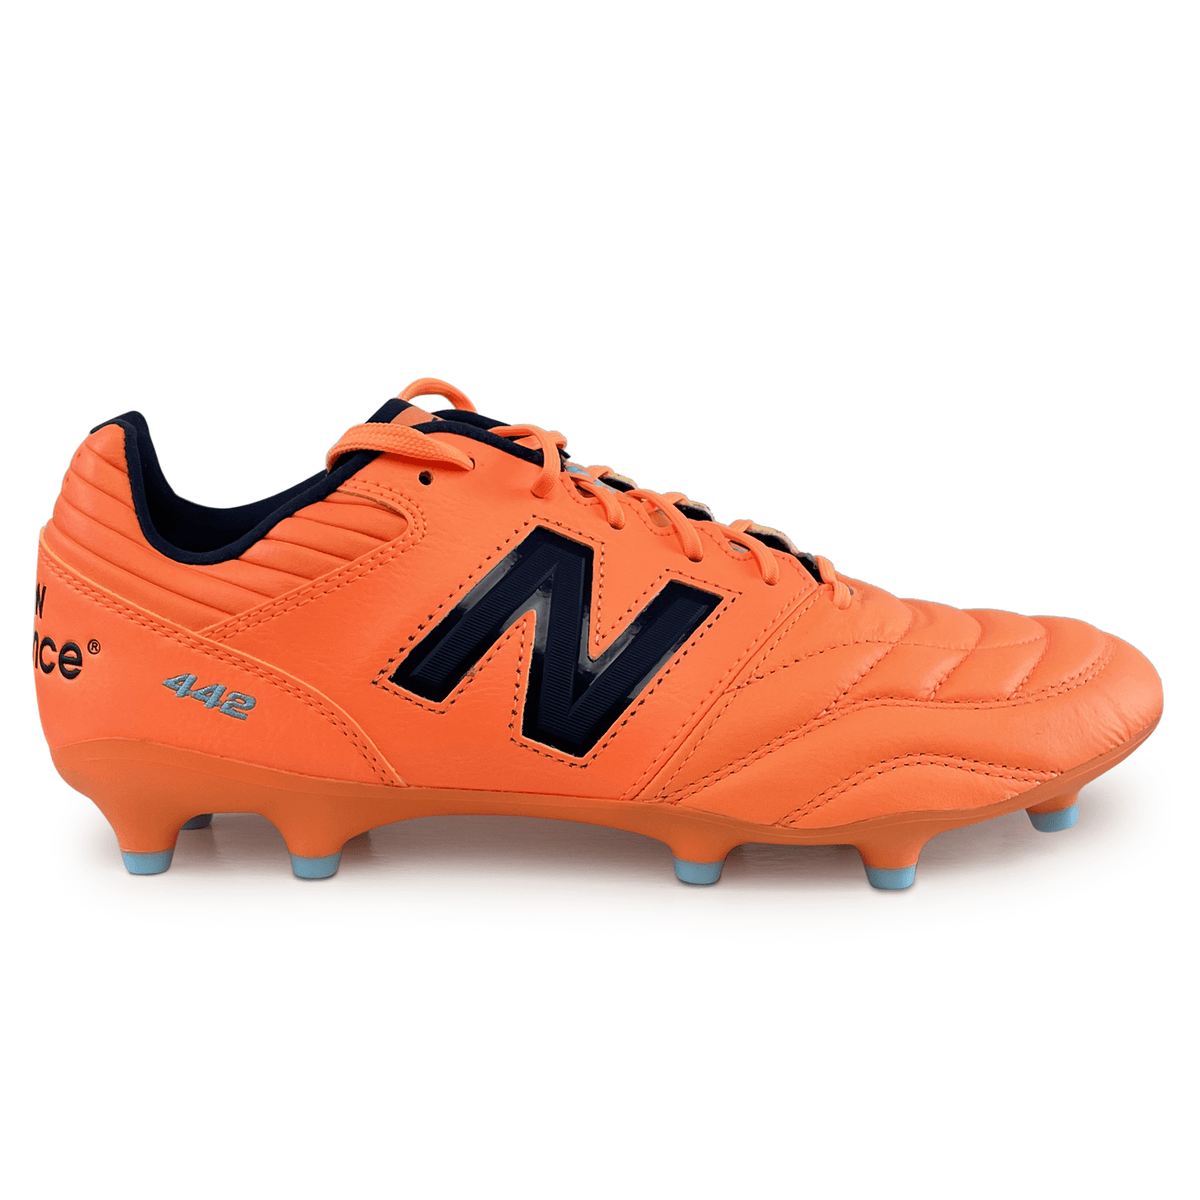 442 v2 Pro FG Wide Boots - Hot Mango by New Balance - World Rugby Shop